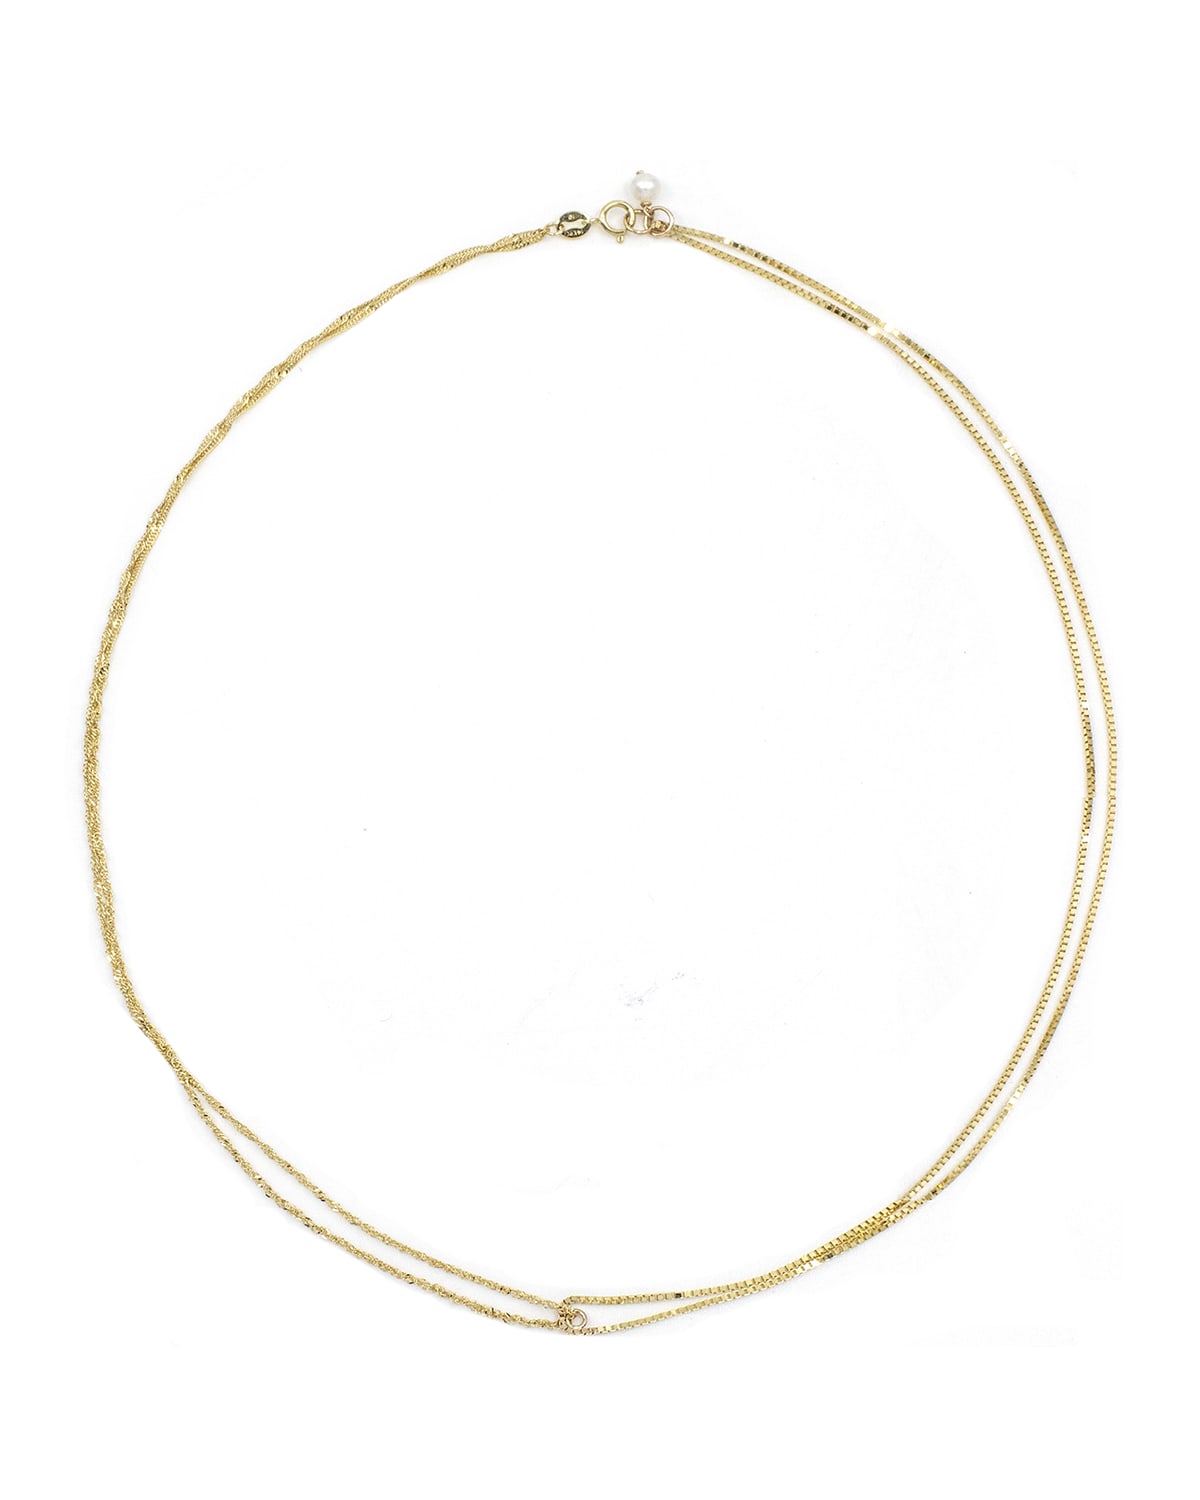 Poppy Finch 14k Gold Mixed Double Chain Necklace